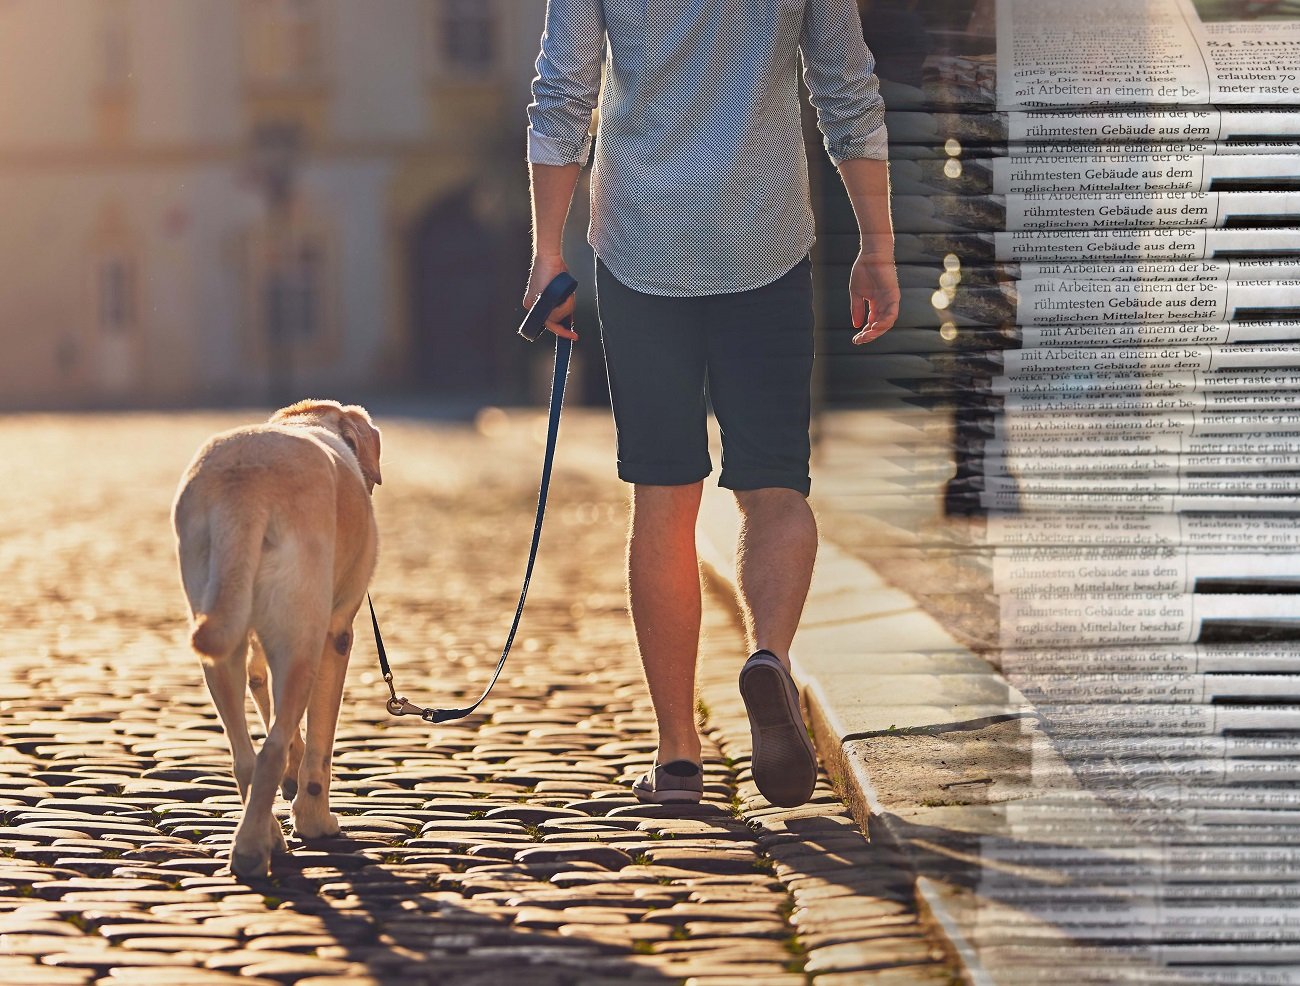 Morning in the city. Young man walking with his dog on the old street at golden sunrise. Prague, Czech Republic